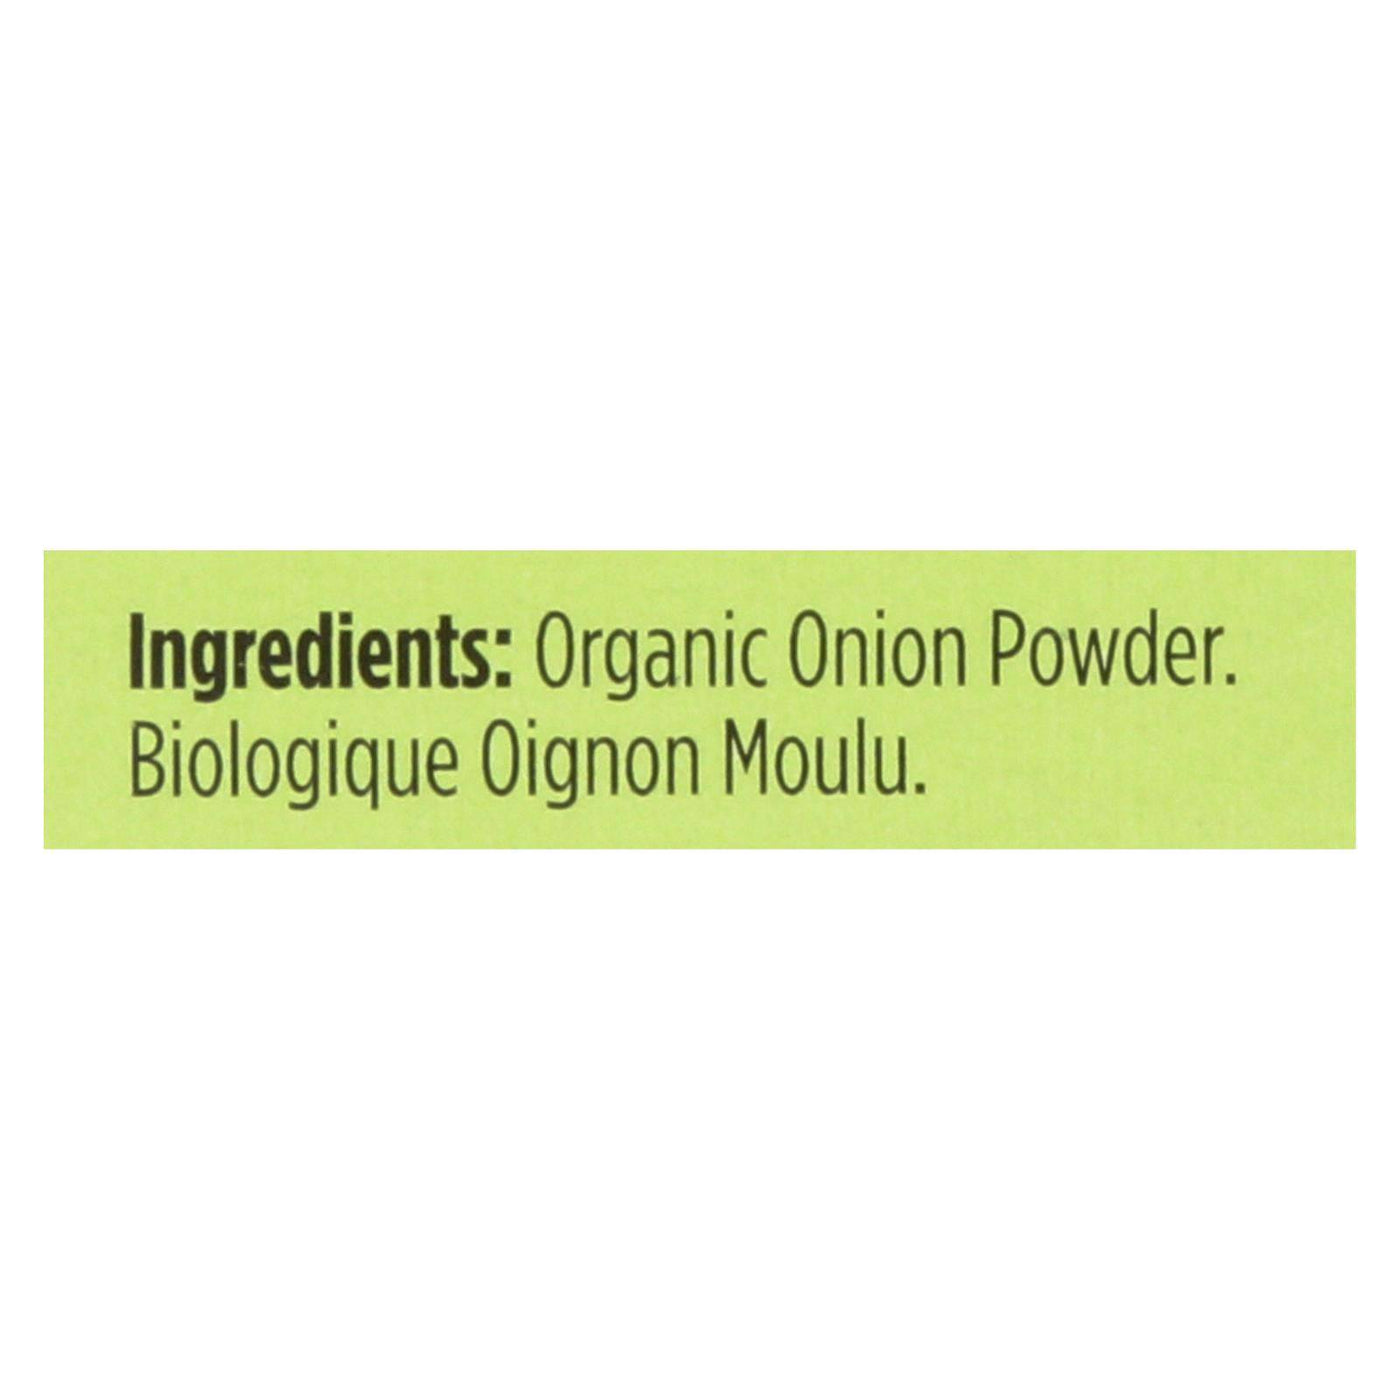 Buy Spicely Organics - Organic Onion Powder - Case Of 6 - 0.4 Oz.  at OnlyNaturals.us